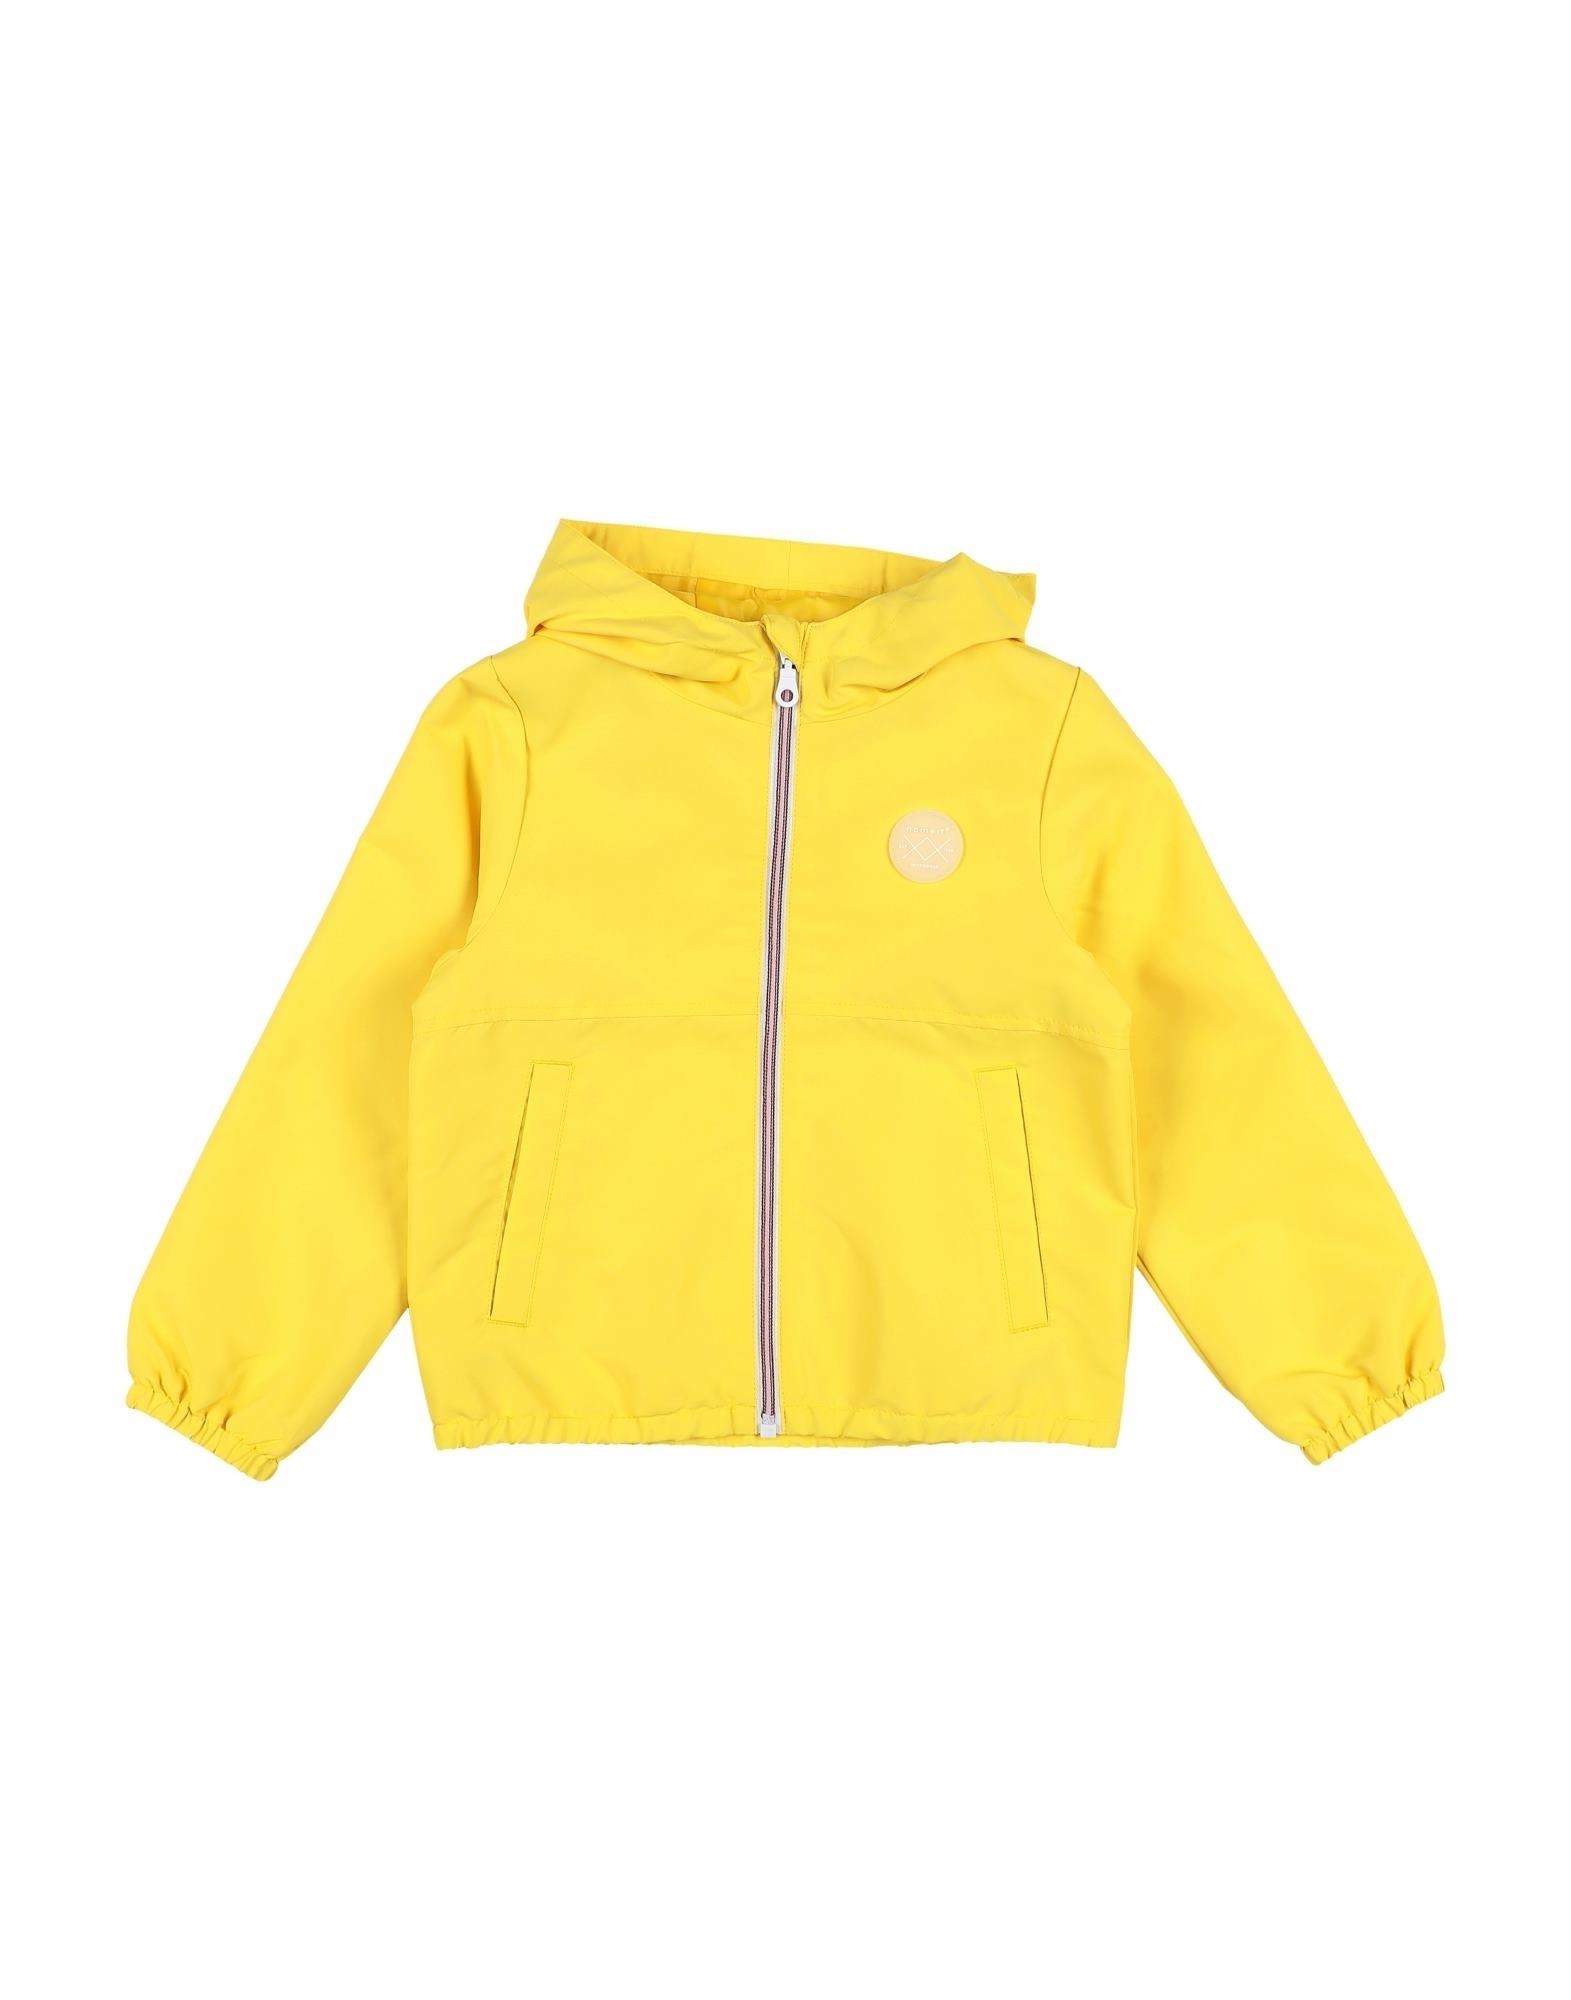 NAME IT® NAME IT TODDLER BOY JACKET YELLOW SIZE 4 RECYCLED POLYESTER,16025669KP 2